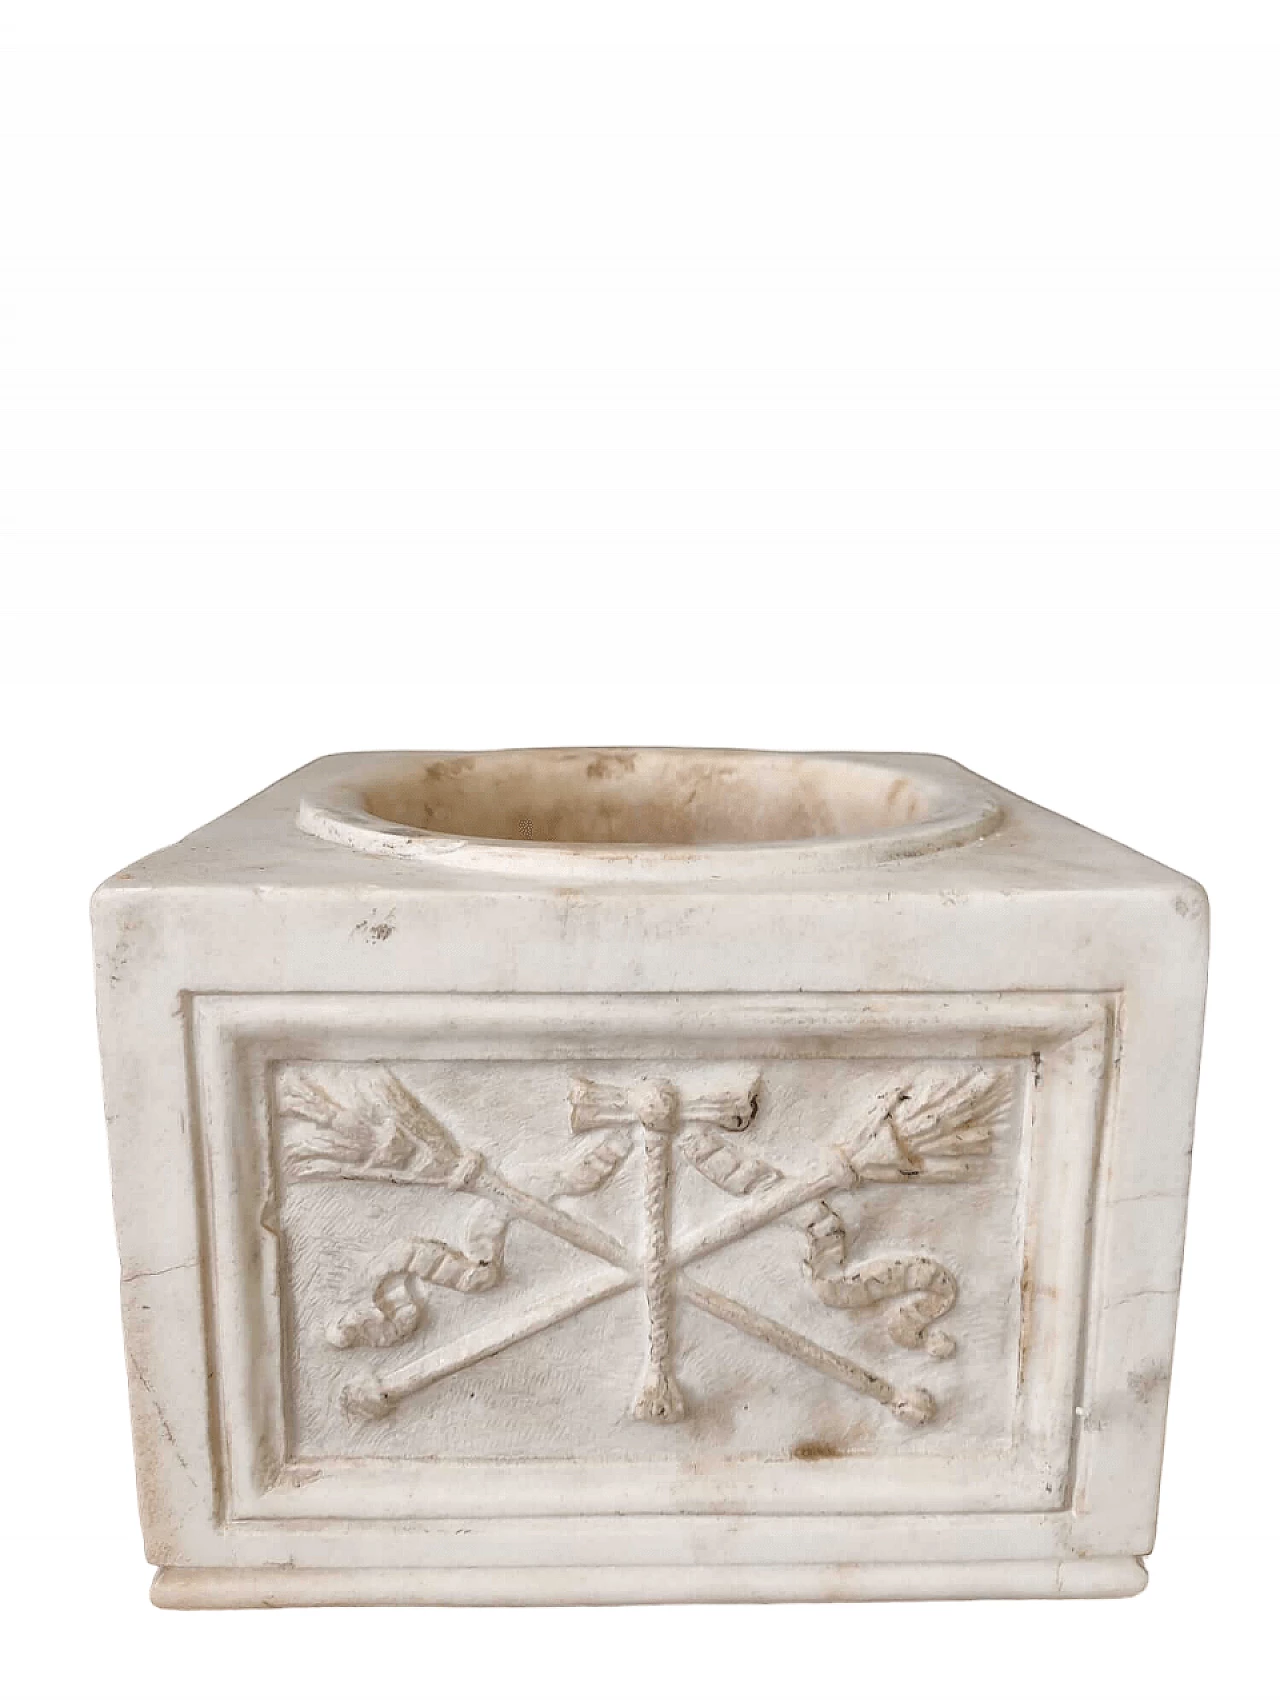 Carved stoup, early 19th century 8